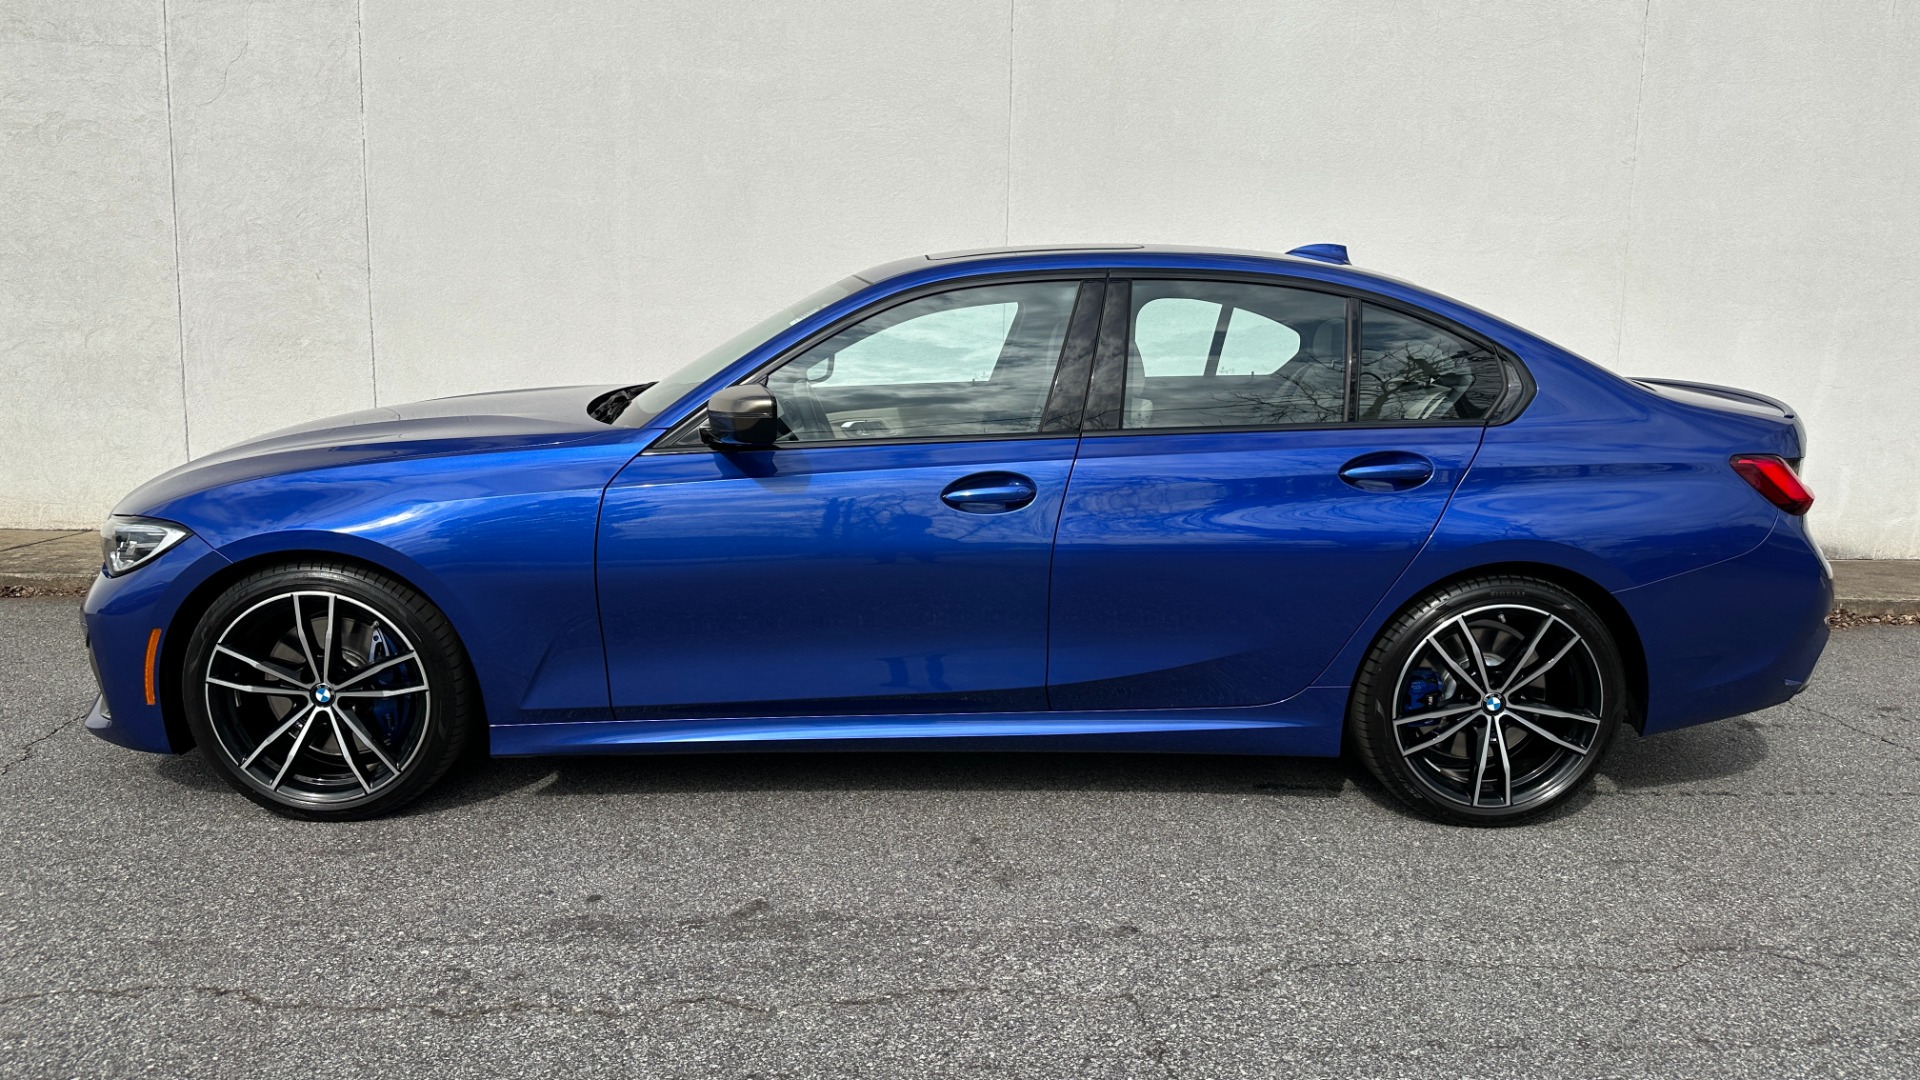 Used 2020 BMW 3 Series M340i / M SPORT BRAKES / M PERF EXHAUST / PREMIUM PACKAGE for sale $46,495 at Formula Imports in Charlotte NC 28227 3